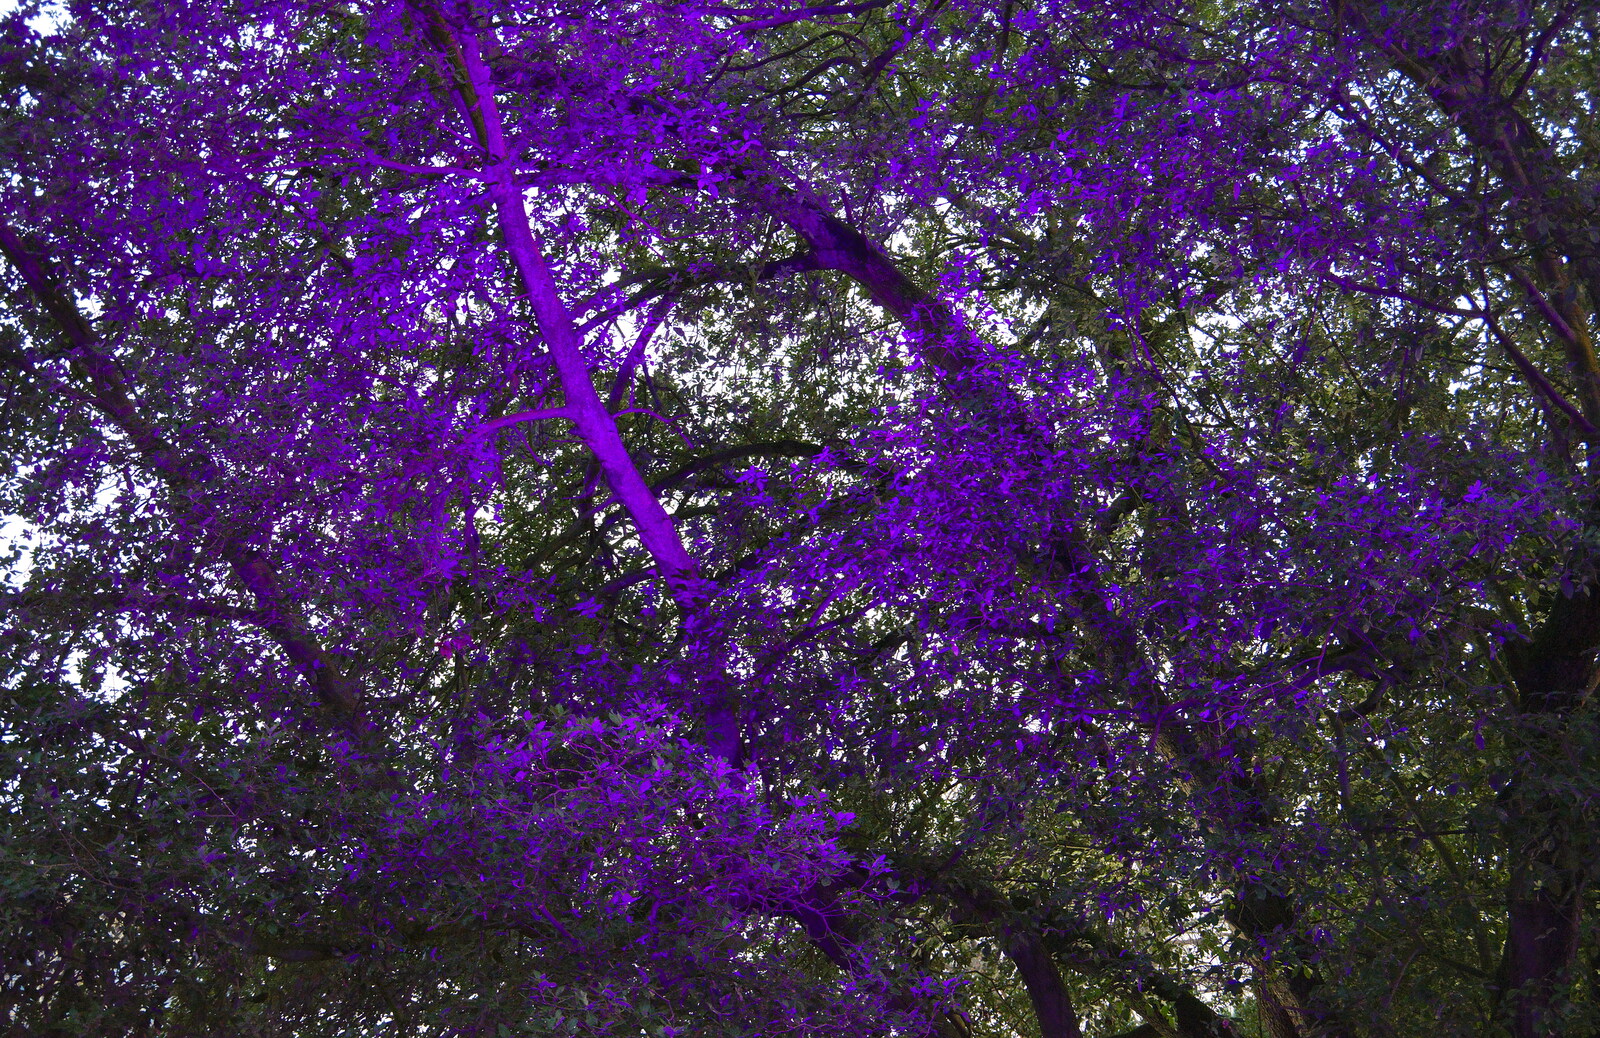 A tree is lit up in purple from The Tiles of Ickworth House, Horringer, Suffolk - 30th November 2019